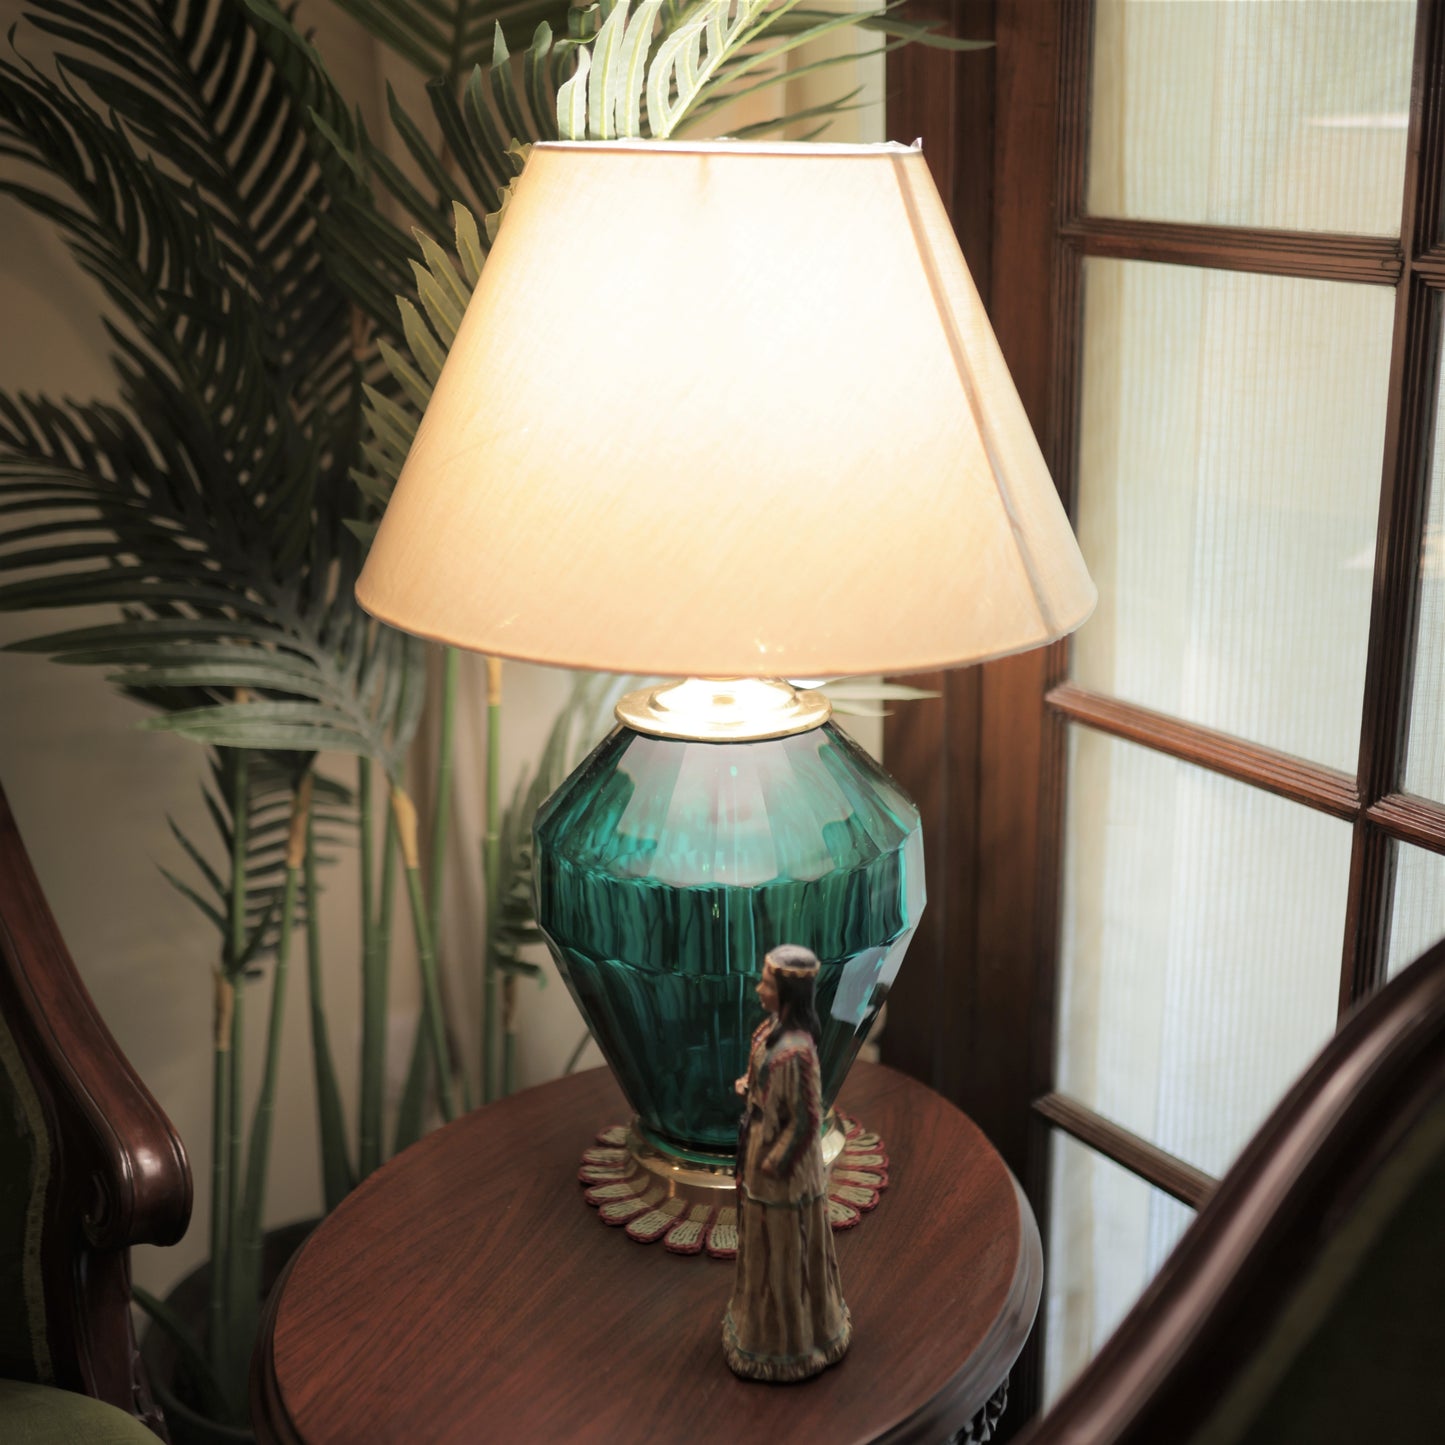 Turquoise Glass Lamp